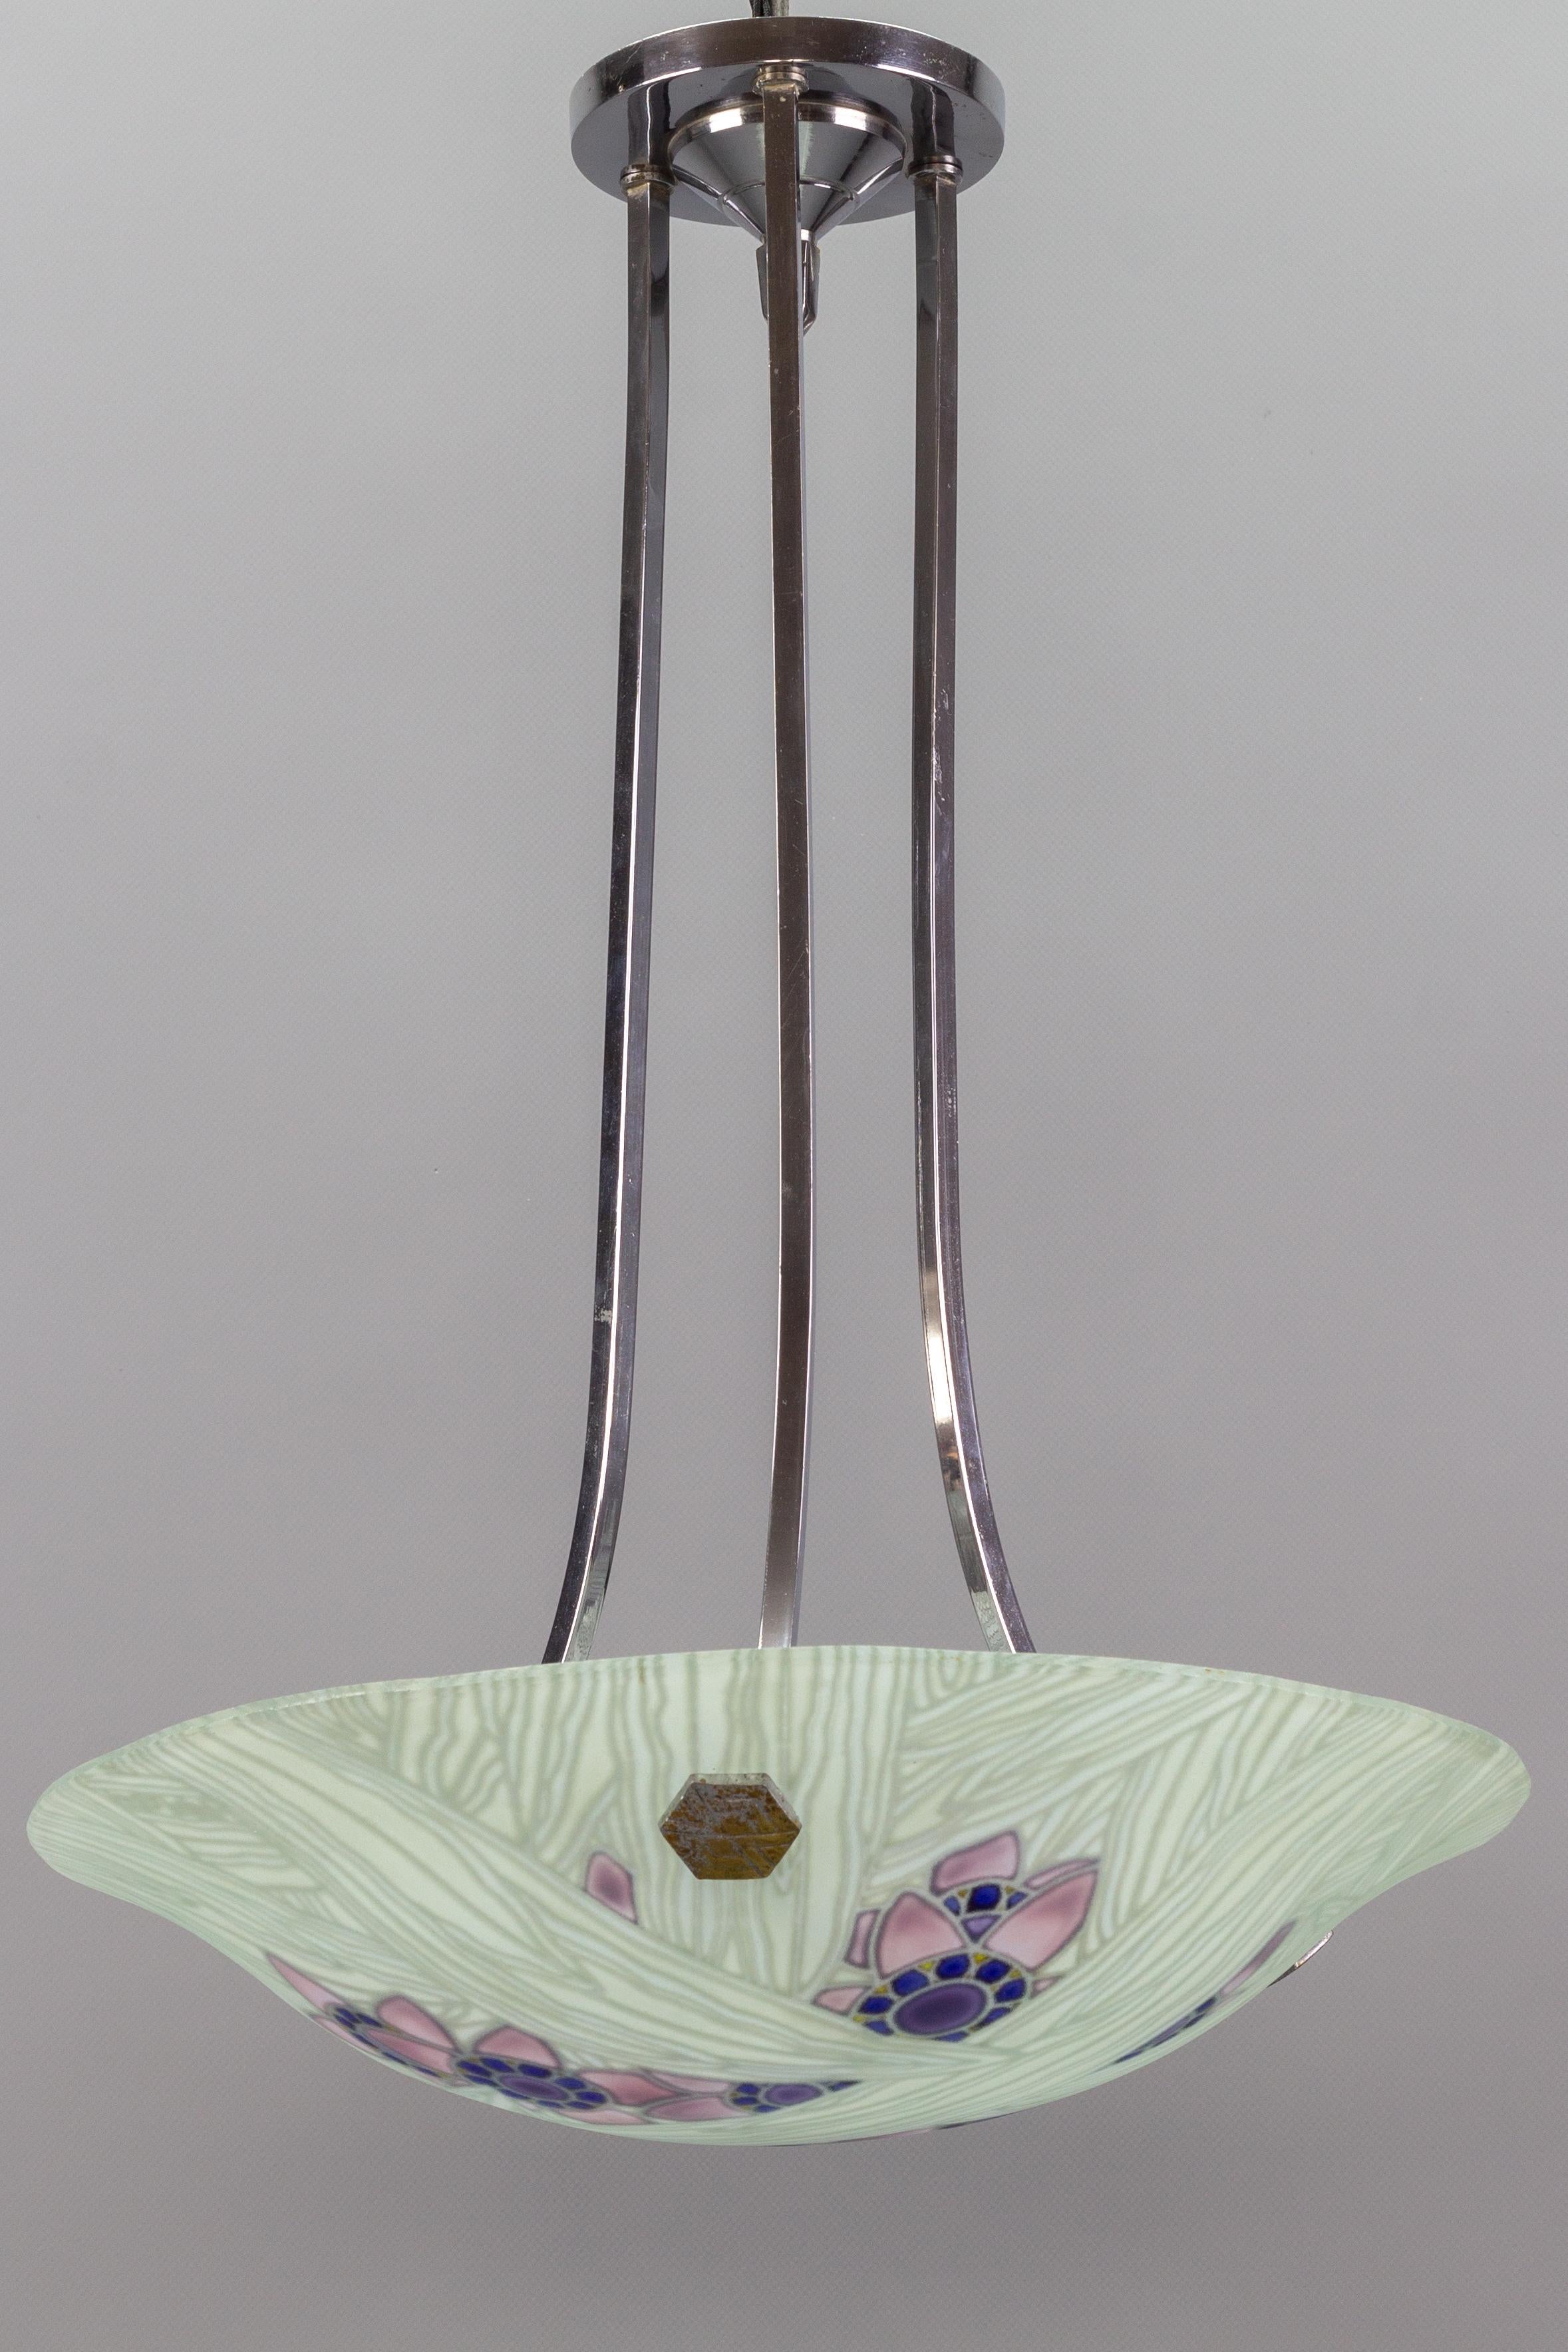 French Art Deco Loys Lucha Signed Floral Glass and Chrome Pendant Light, 1930s For Sale 2